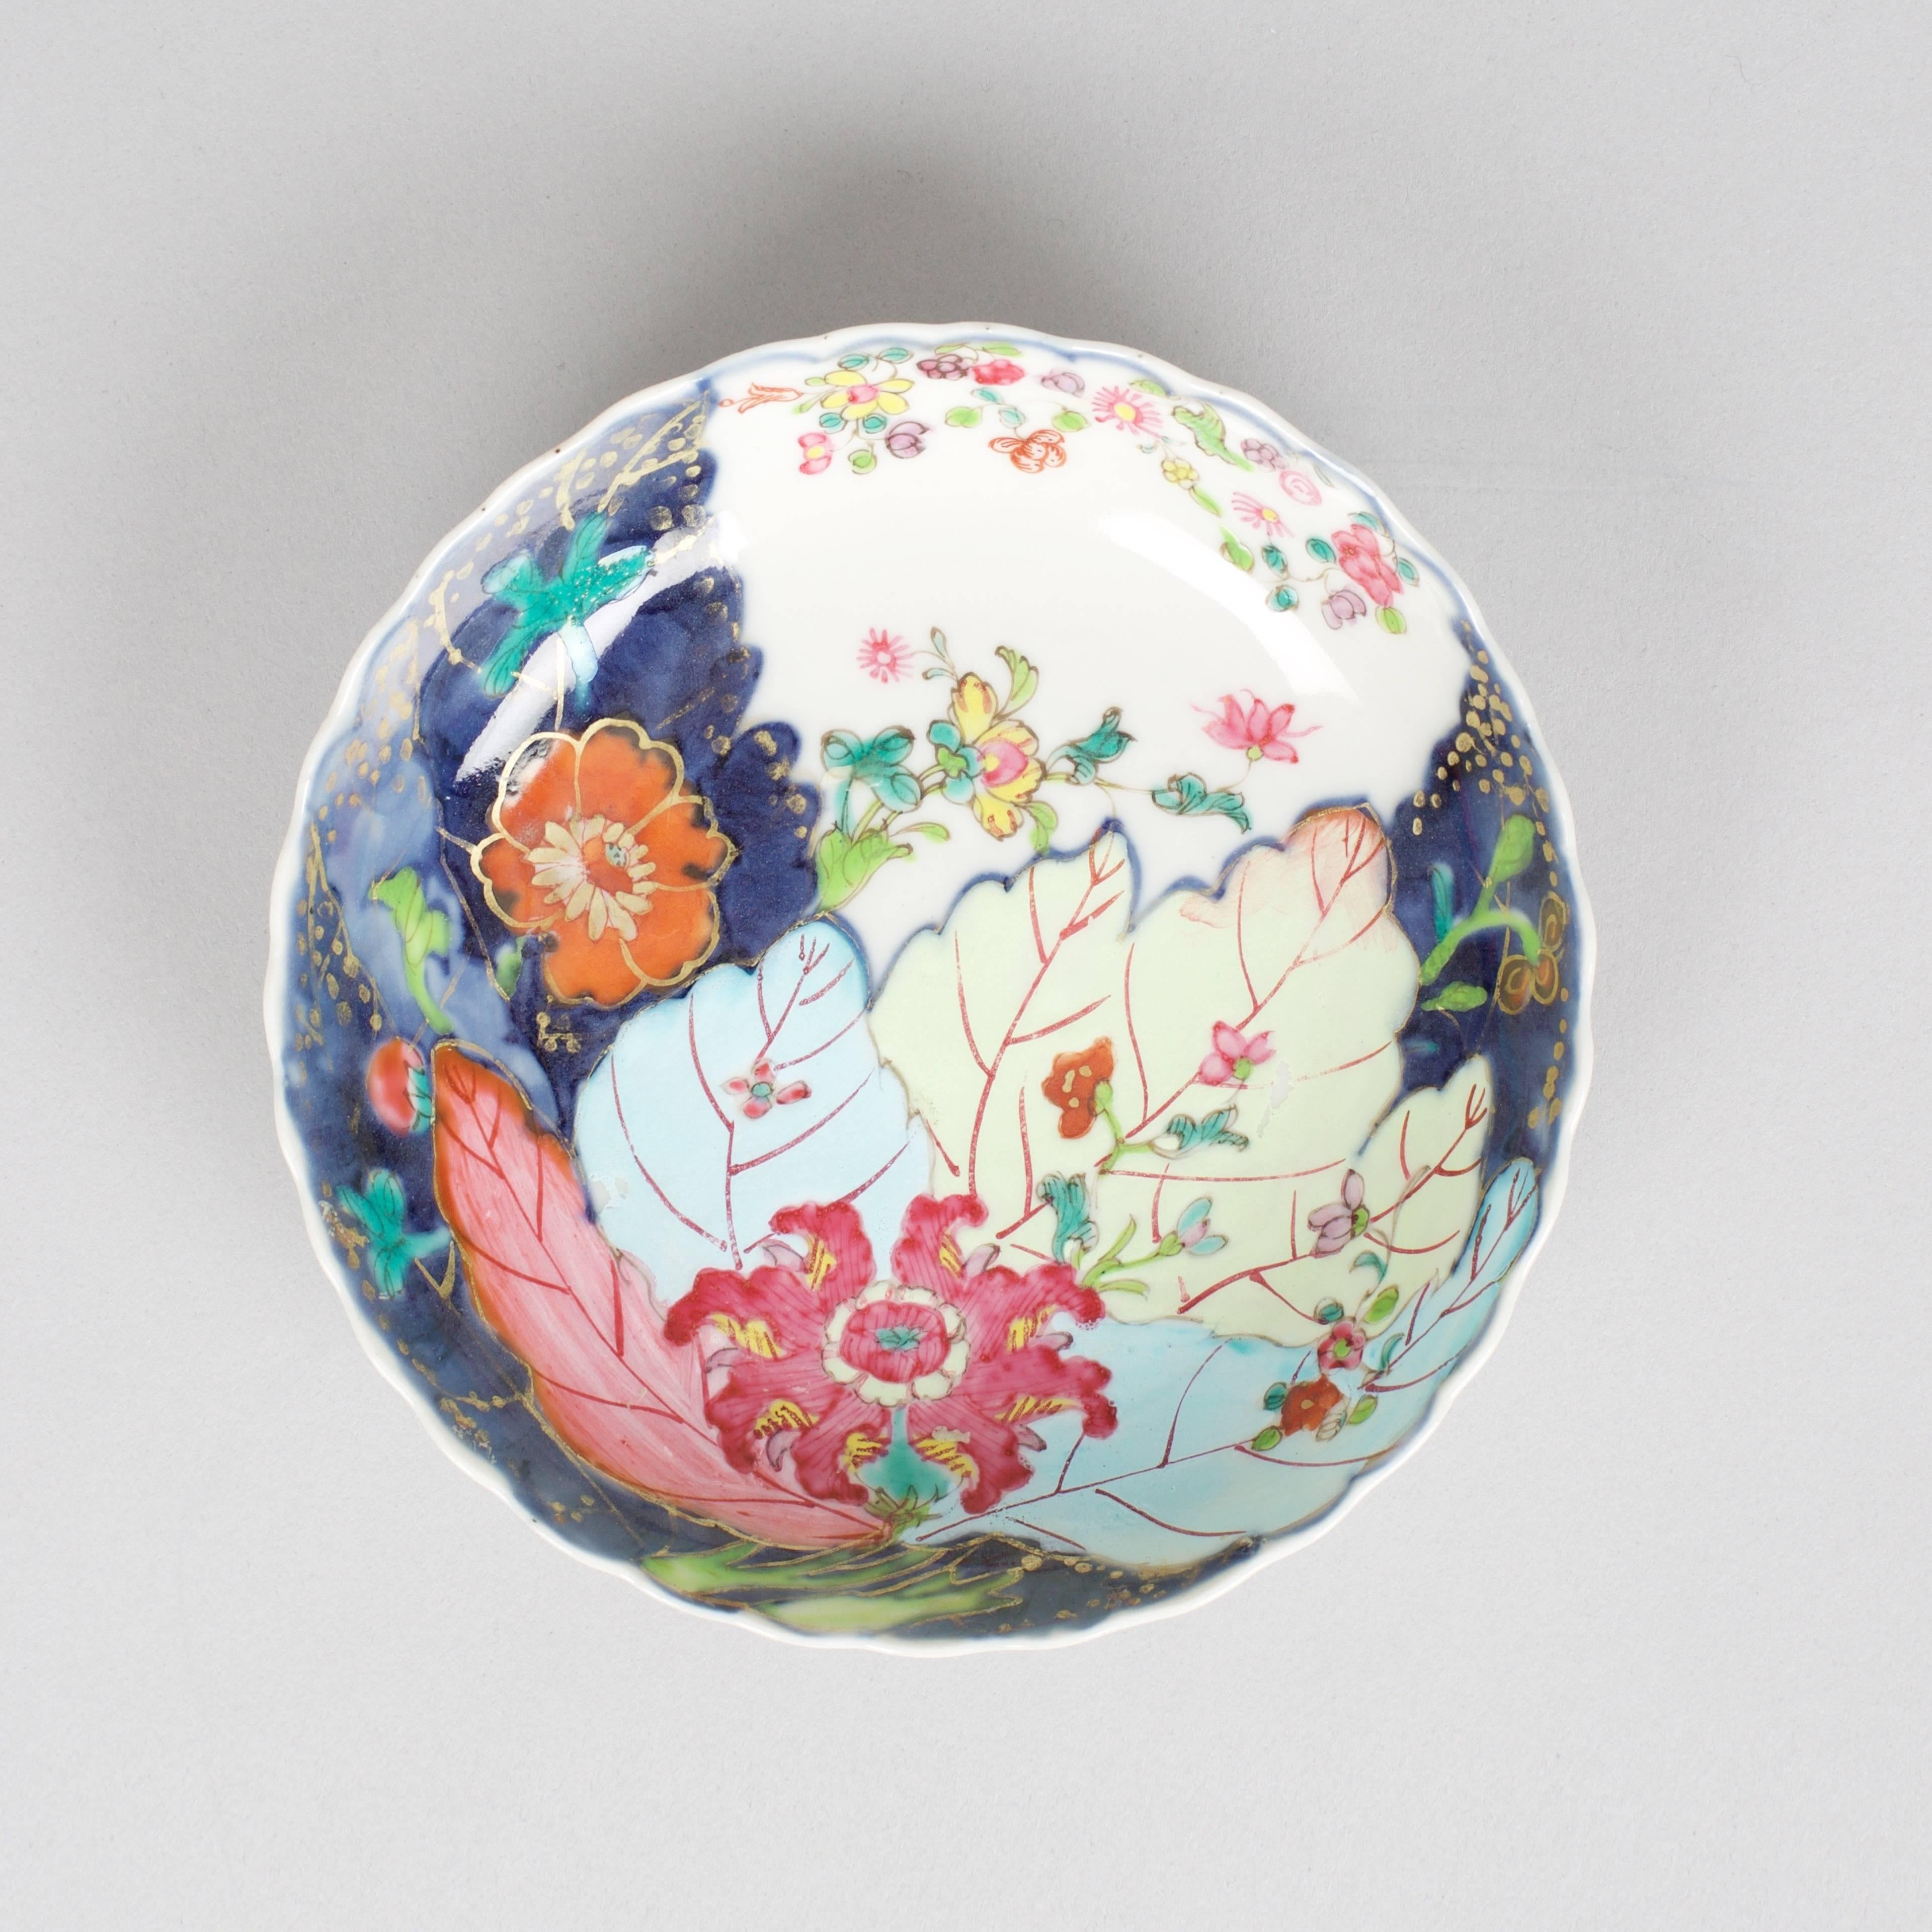 A small Chinese porcelain famille rose saucer painted with tobacco leaves and flowers in bright enamels heightened in gilt, the underside with three flowerheads.
Measures: 12cm diameter, 2.6cm high.
Qianlong, 1736-1795.